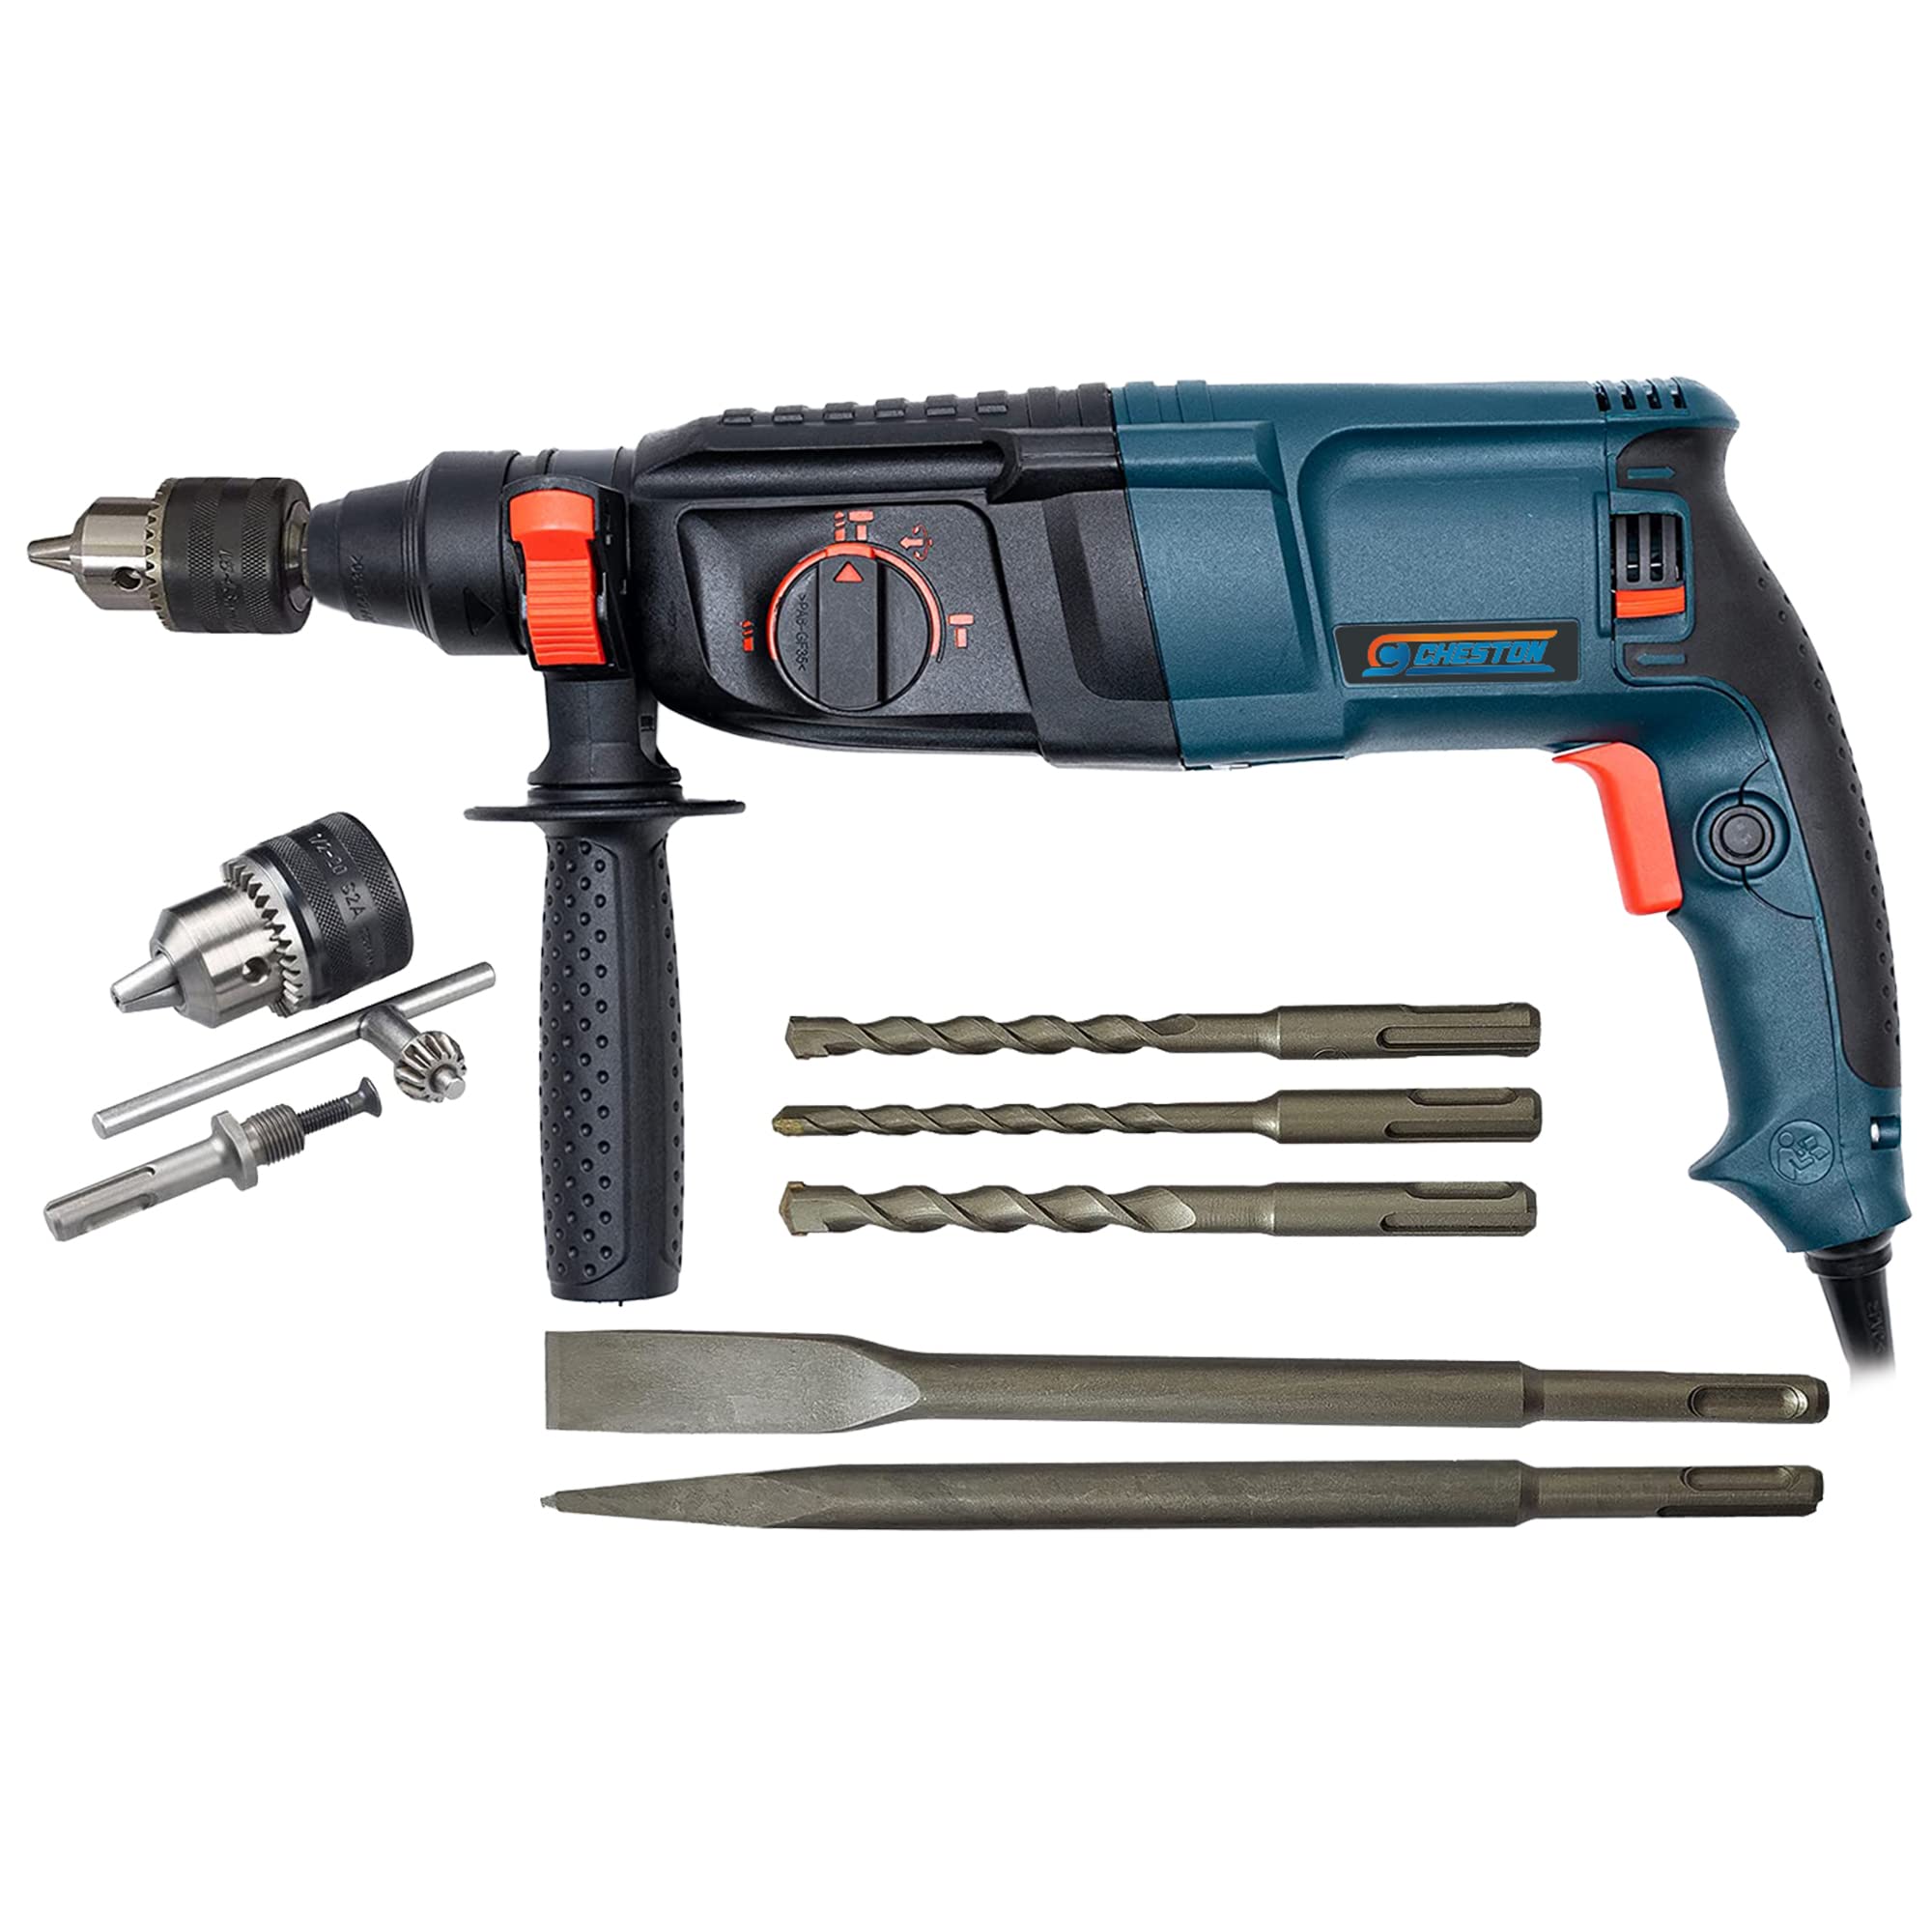 CHESTON 26 mm 850W 900RPM 3 Modes Rotary Hammer Drill Machine with 3-Piece Drill Bit and 2 Chisel & SDS Chuck Adapter Universal Drill for Drilling & Demolition Task